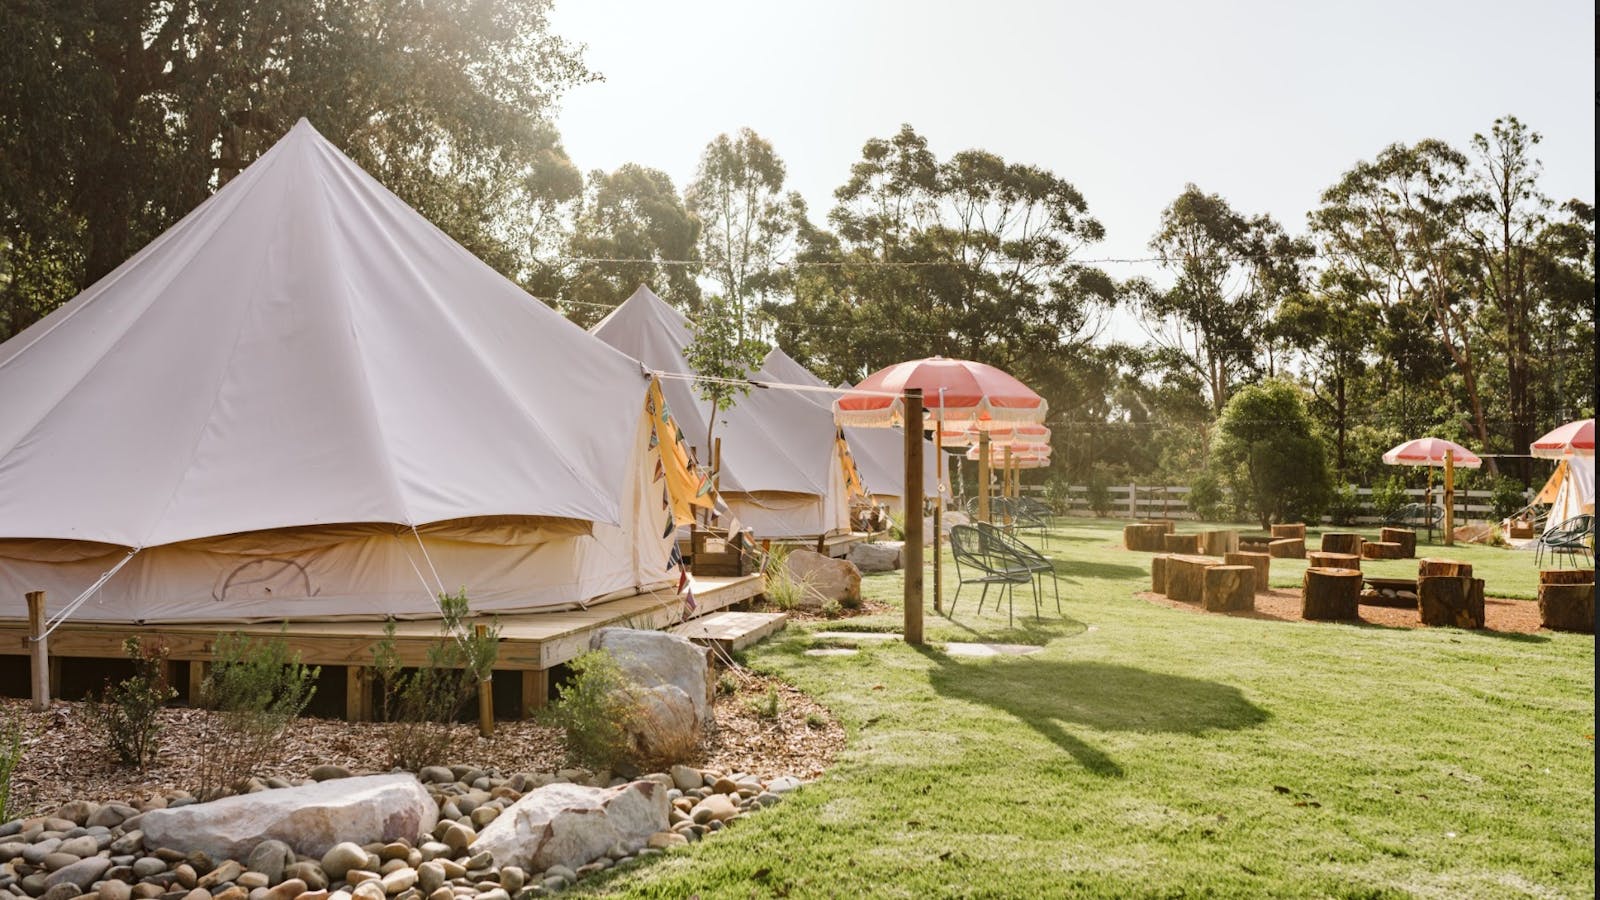 The Woods Farm Glamping Village